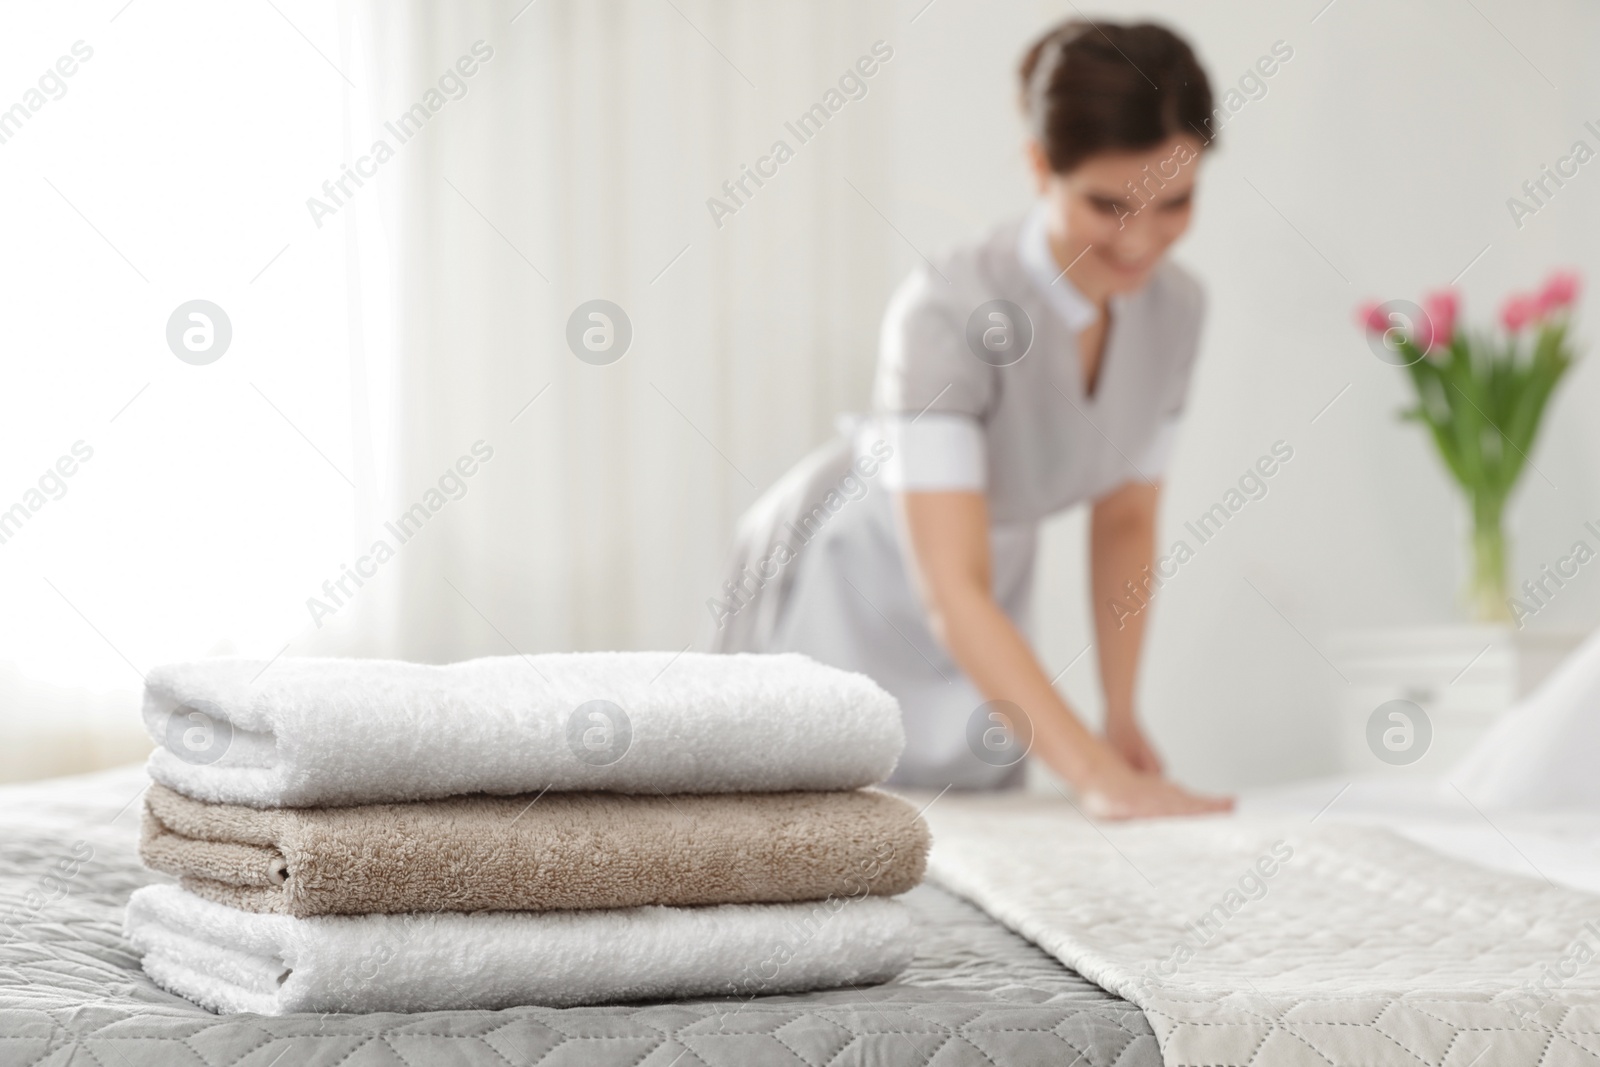 Photo of Young maid making bed in hotel room, focus on stack of towels